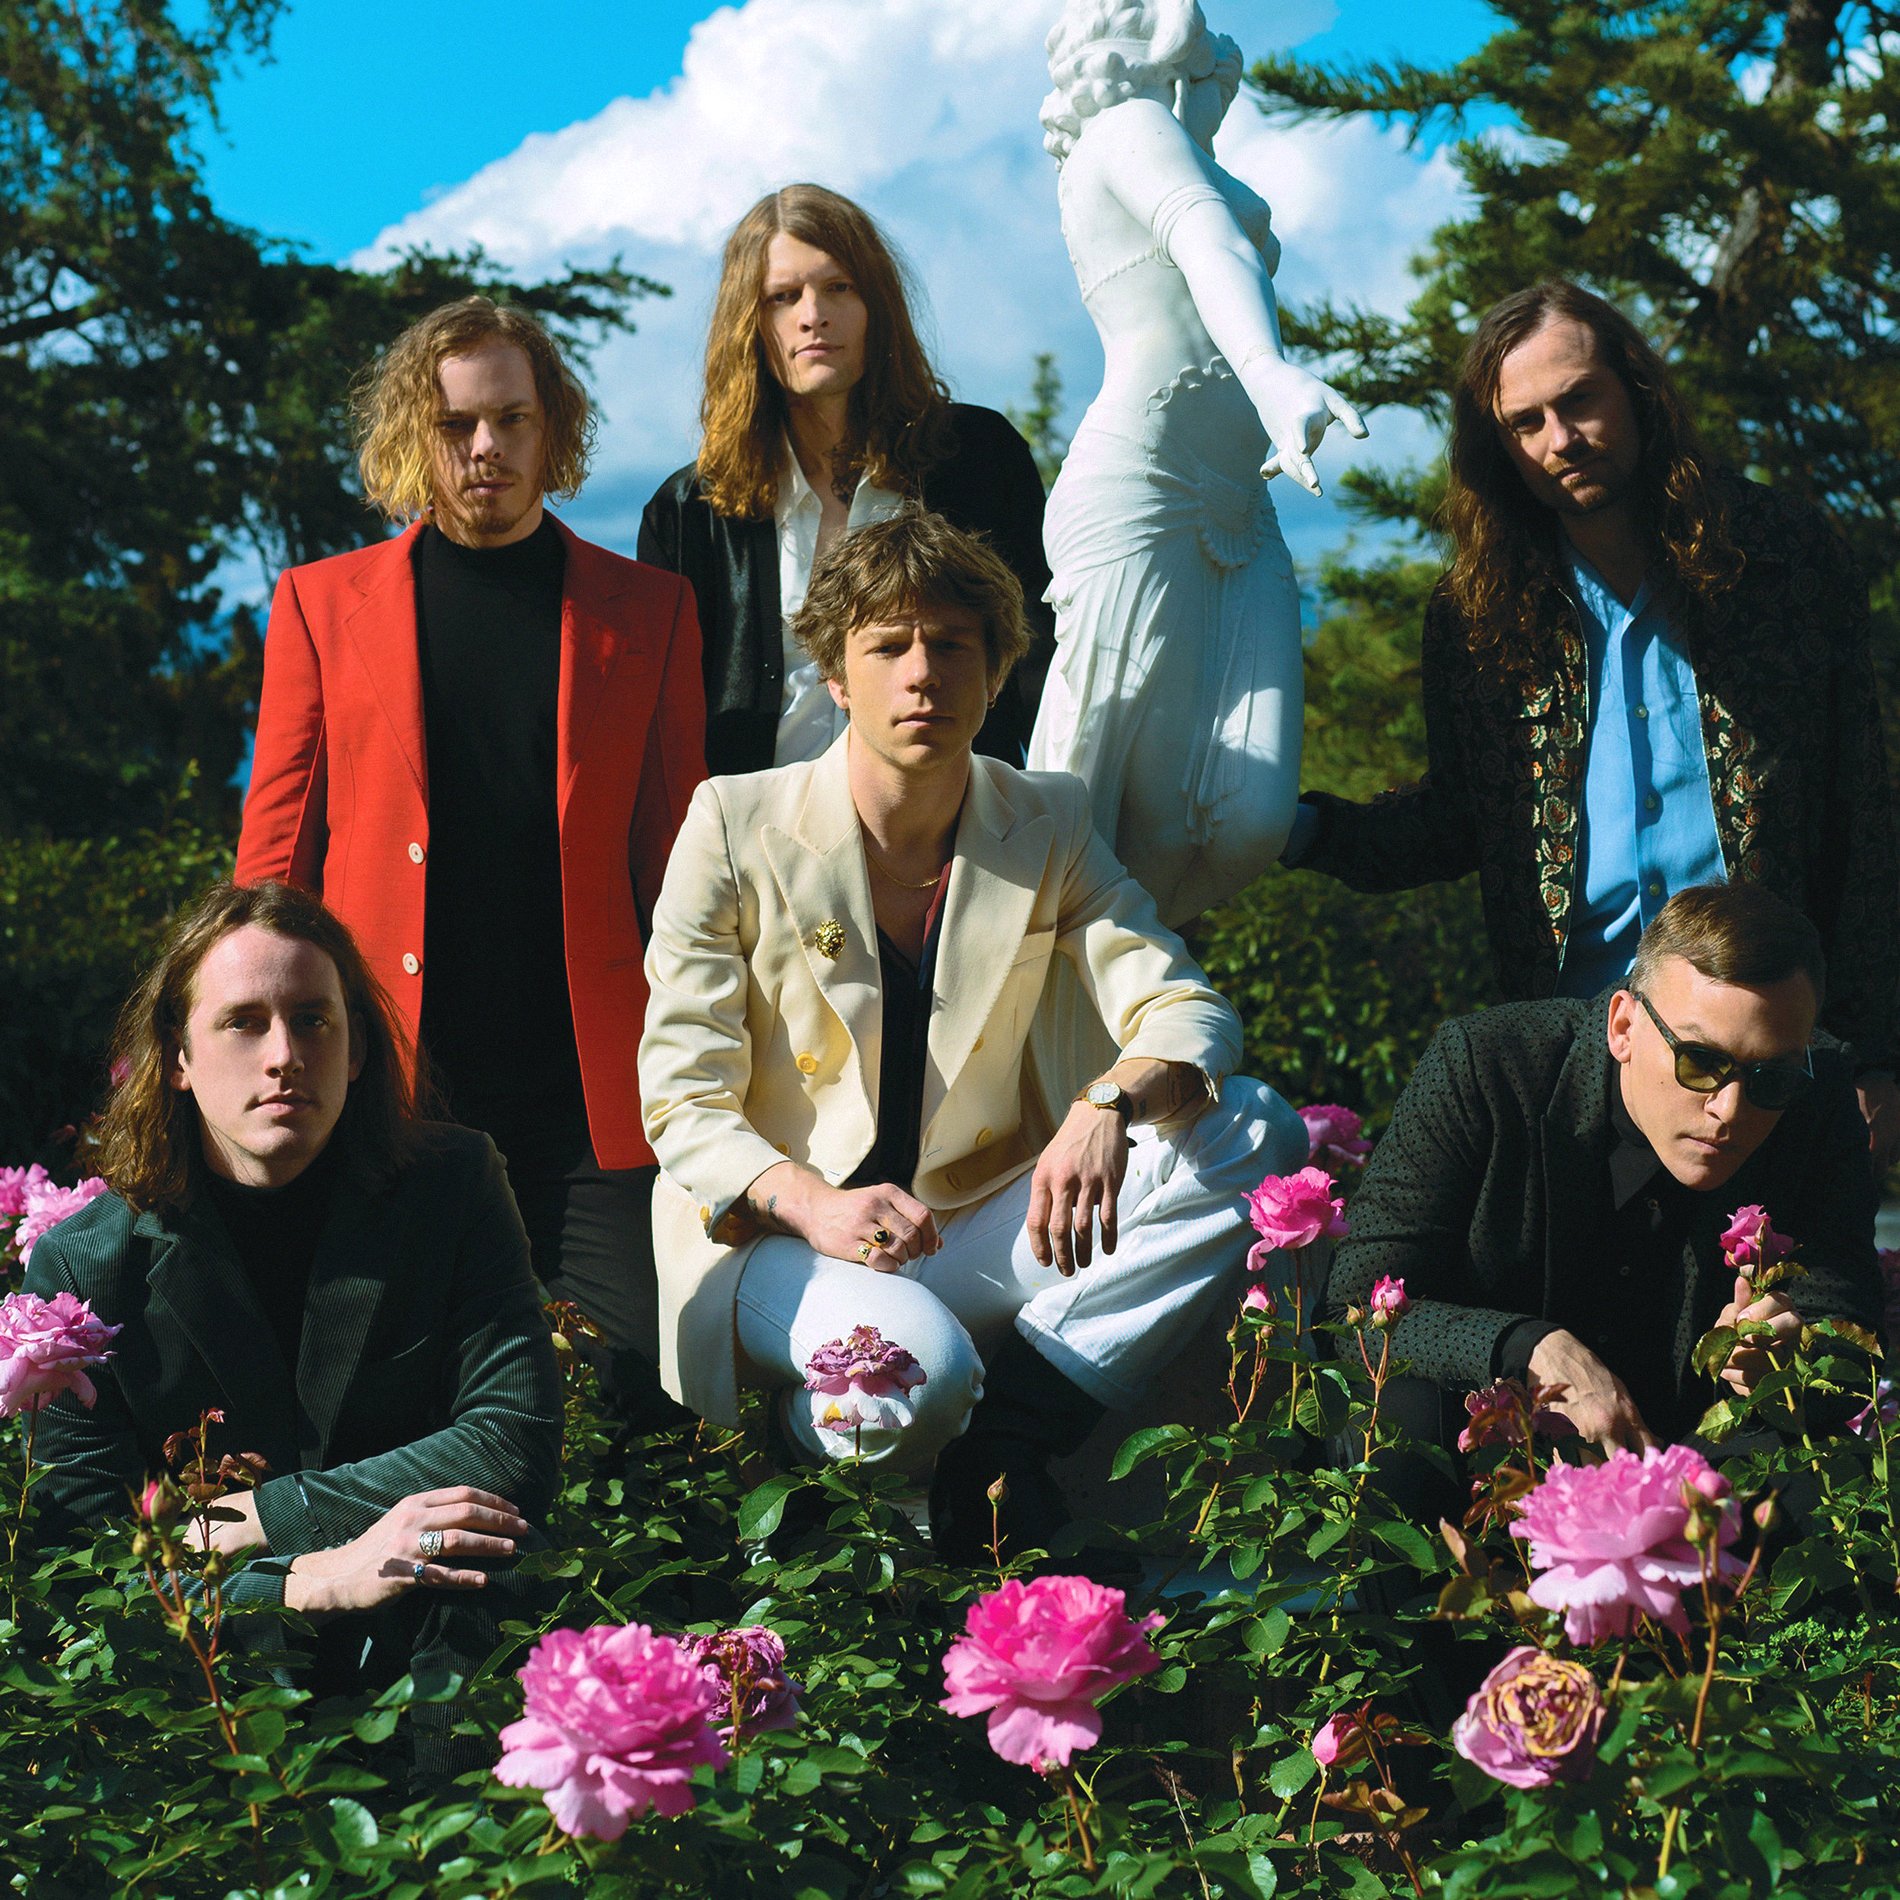 Cage the Elephant music, videos, stats, and photos | Last.fm